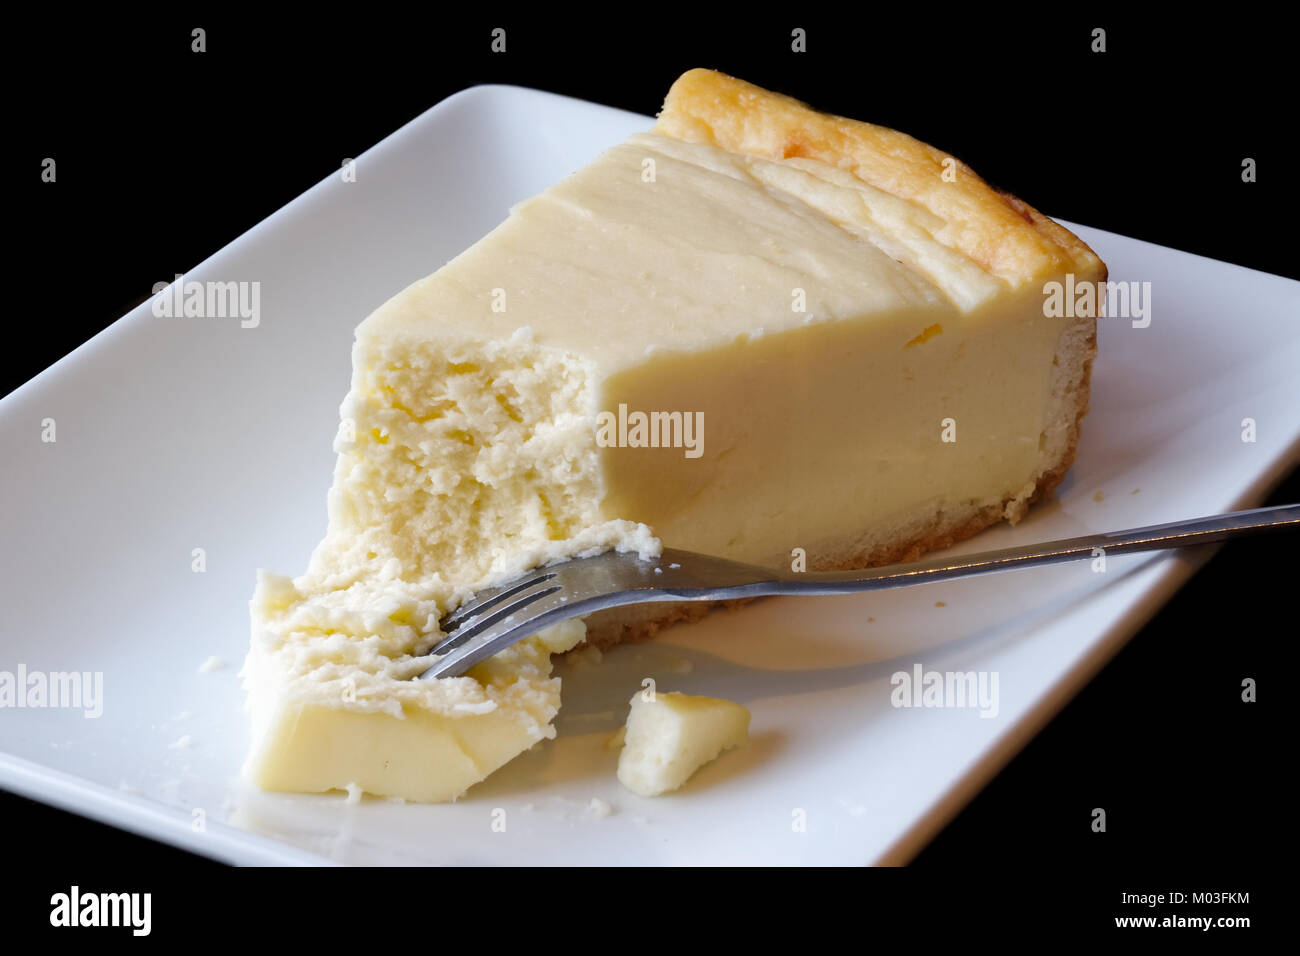 Plain baked cheesecake with cake on fork on white ceramic plate. Black background. Stock Photo